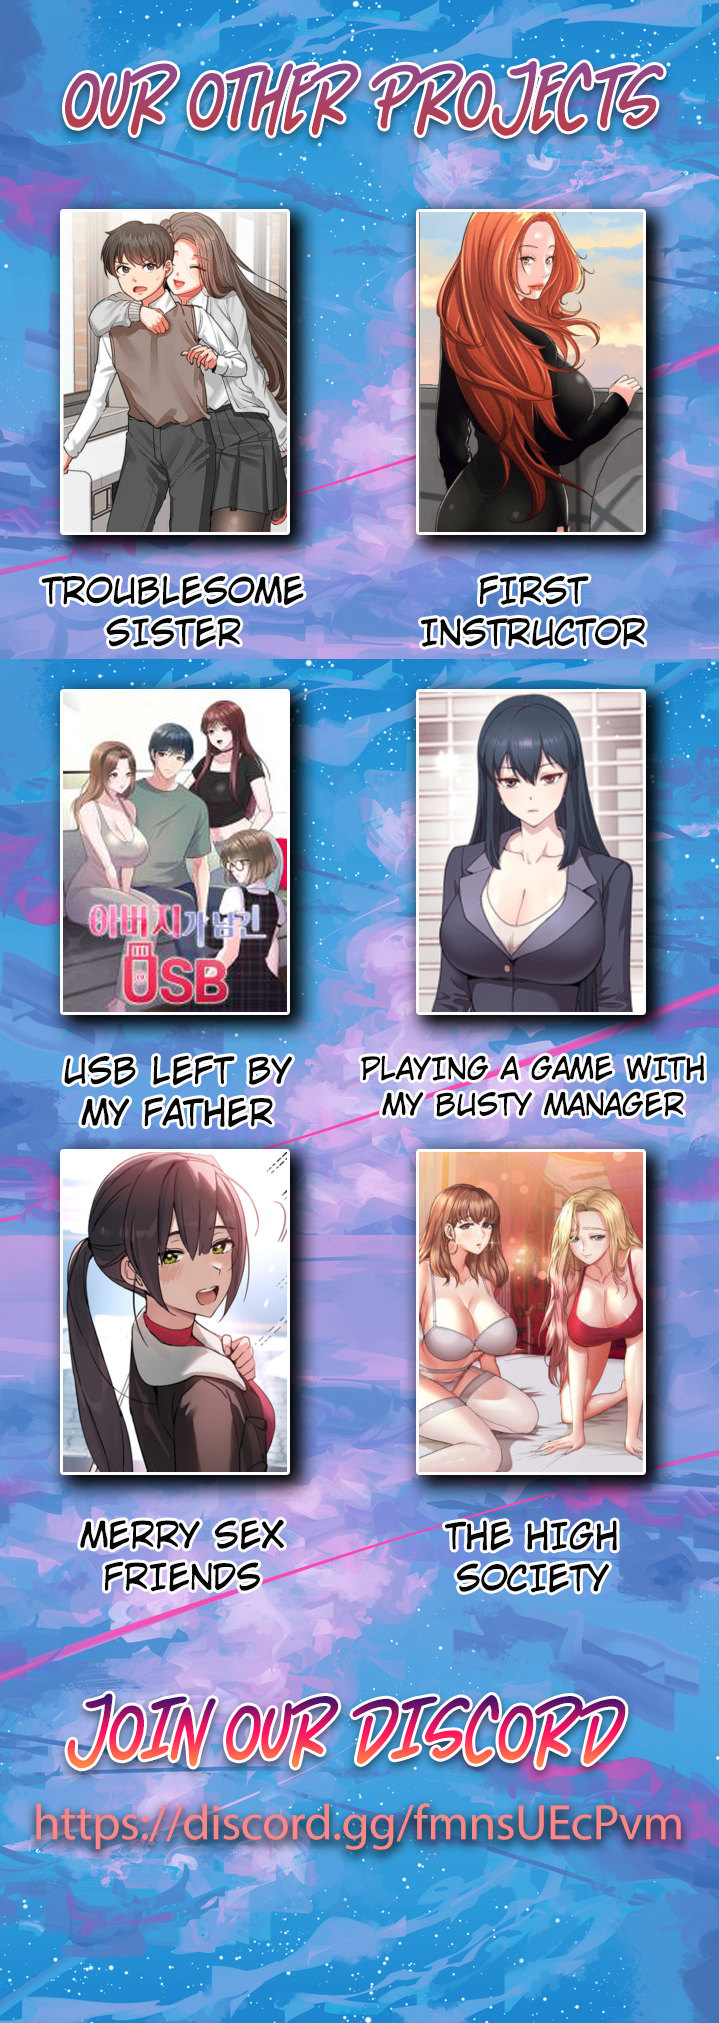 Playing a game with my Busty Manager - Chapter 10 Page 15